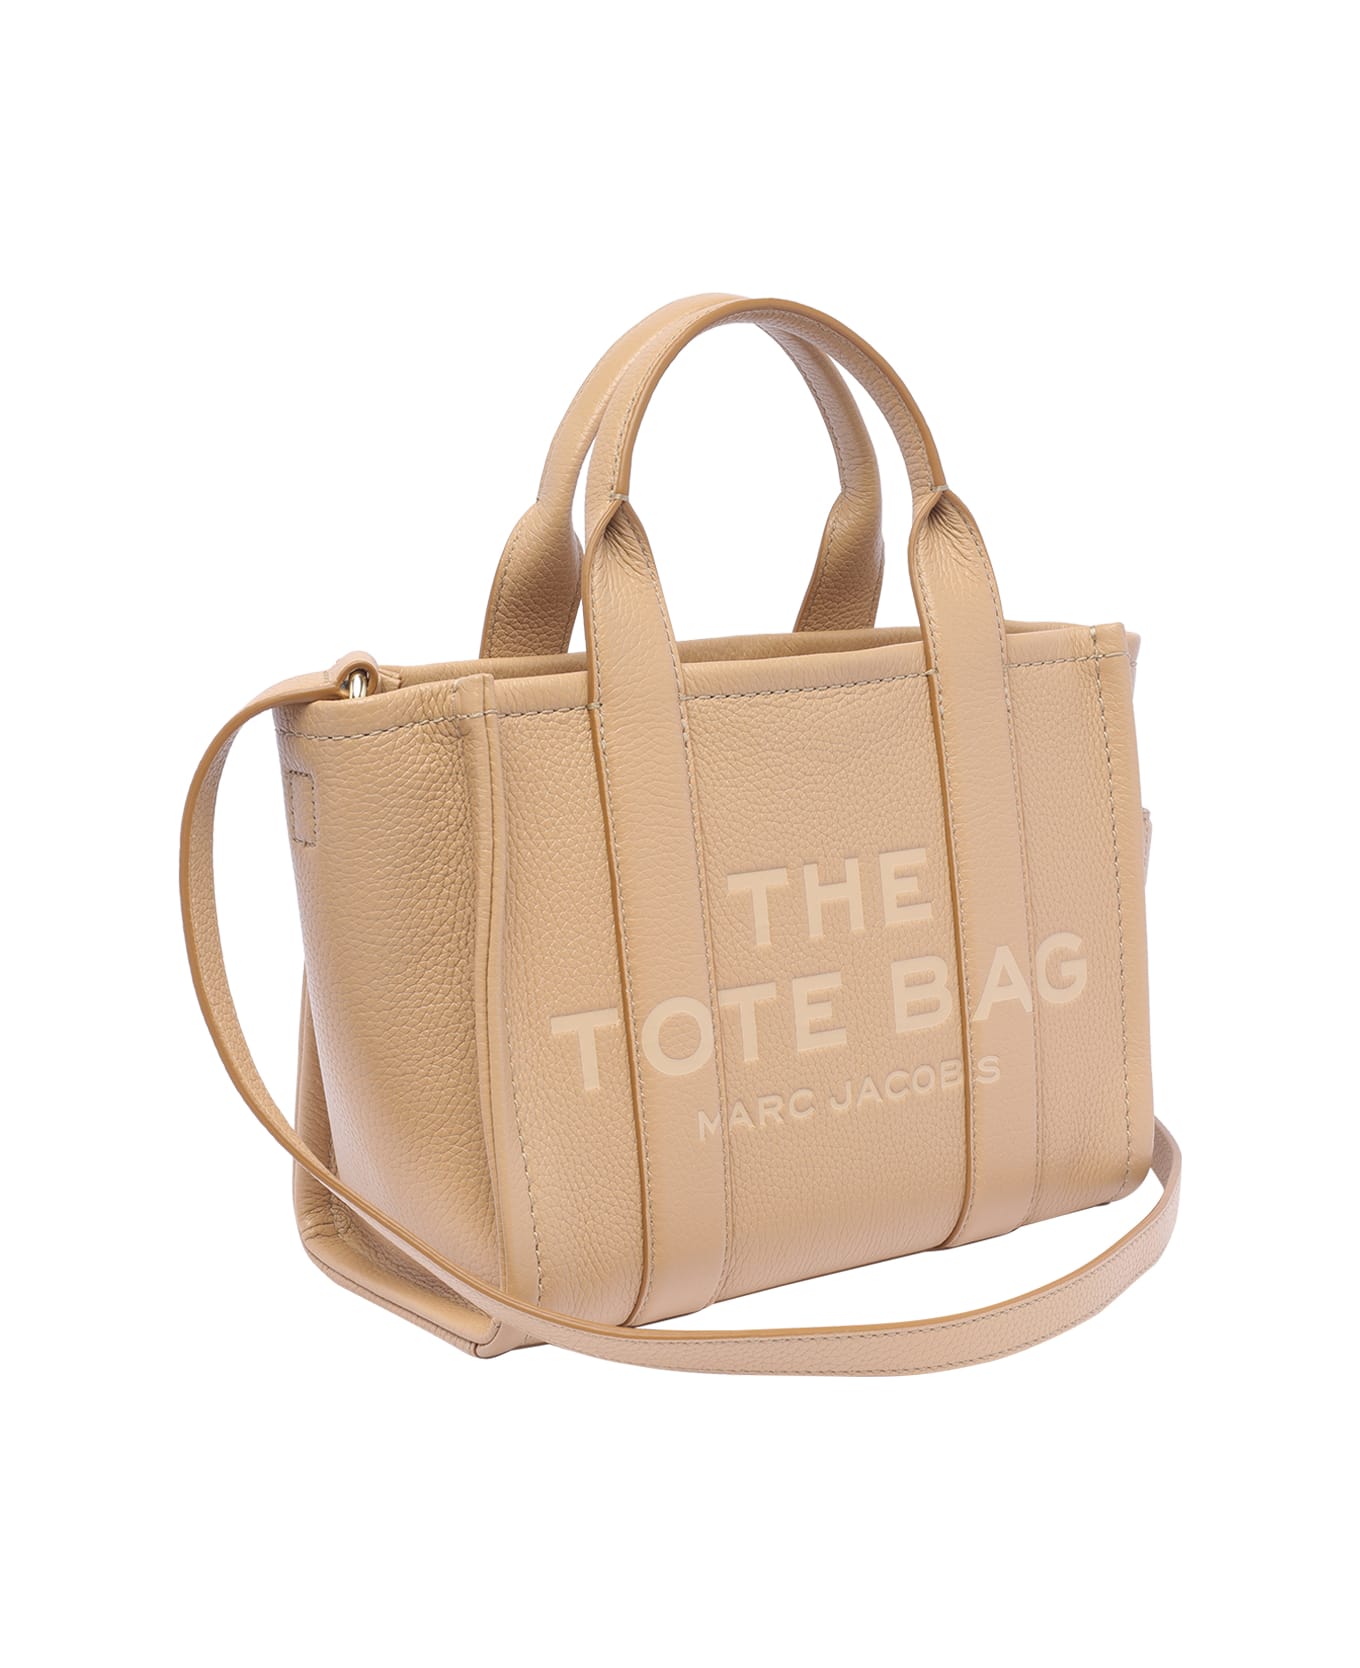 Marc Jacobs The Tote Bag - BROWN